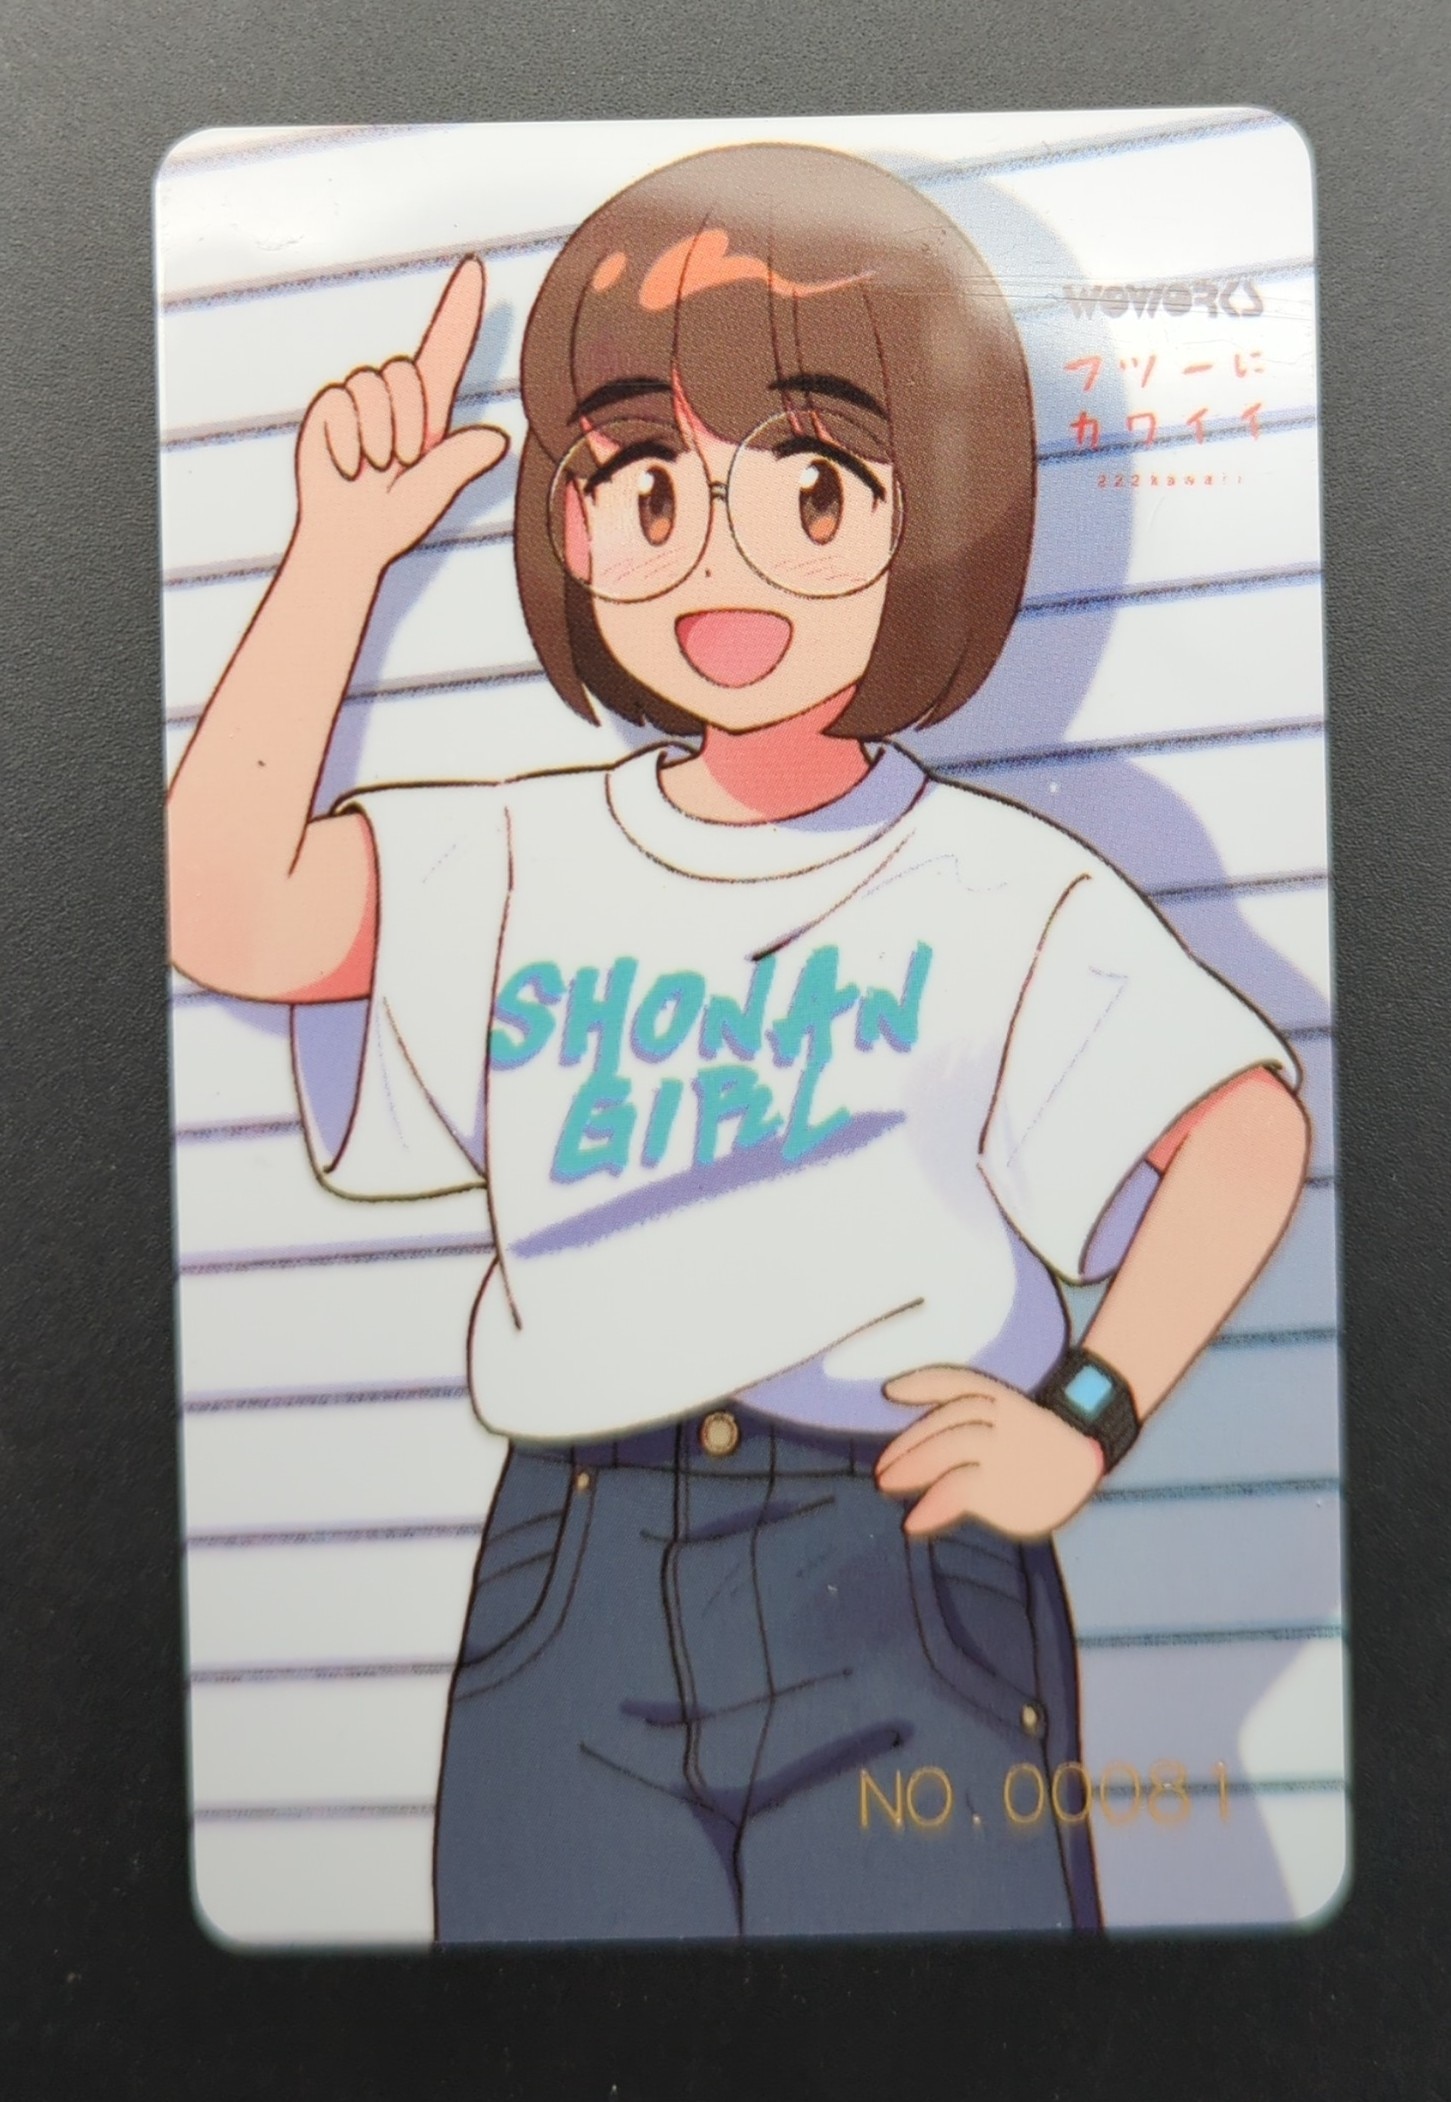 WOWORKS フツーにカワイイ vol.1 あらごん Just a Girl Brown hair ver